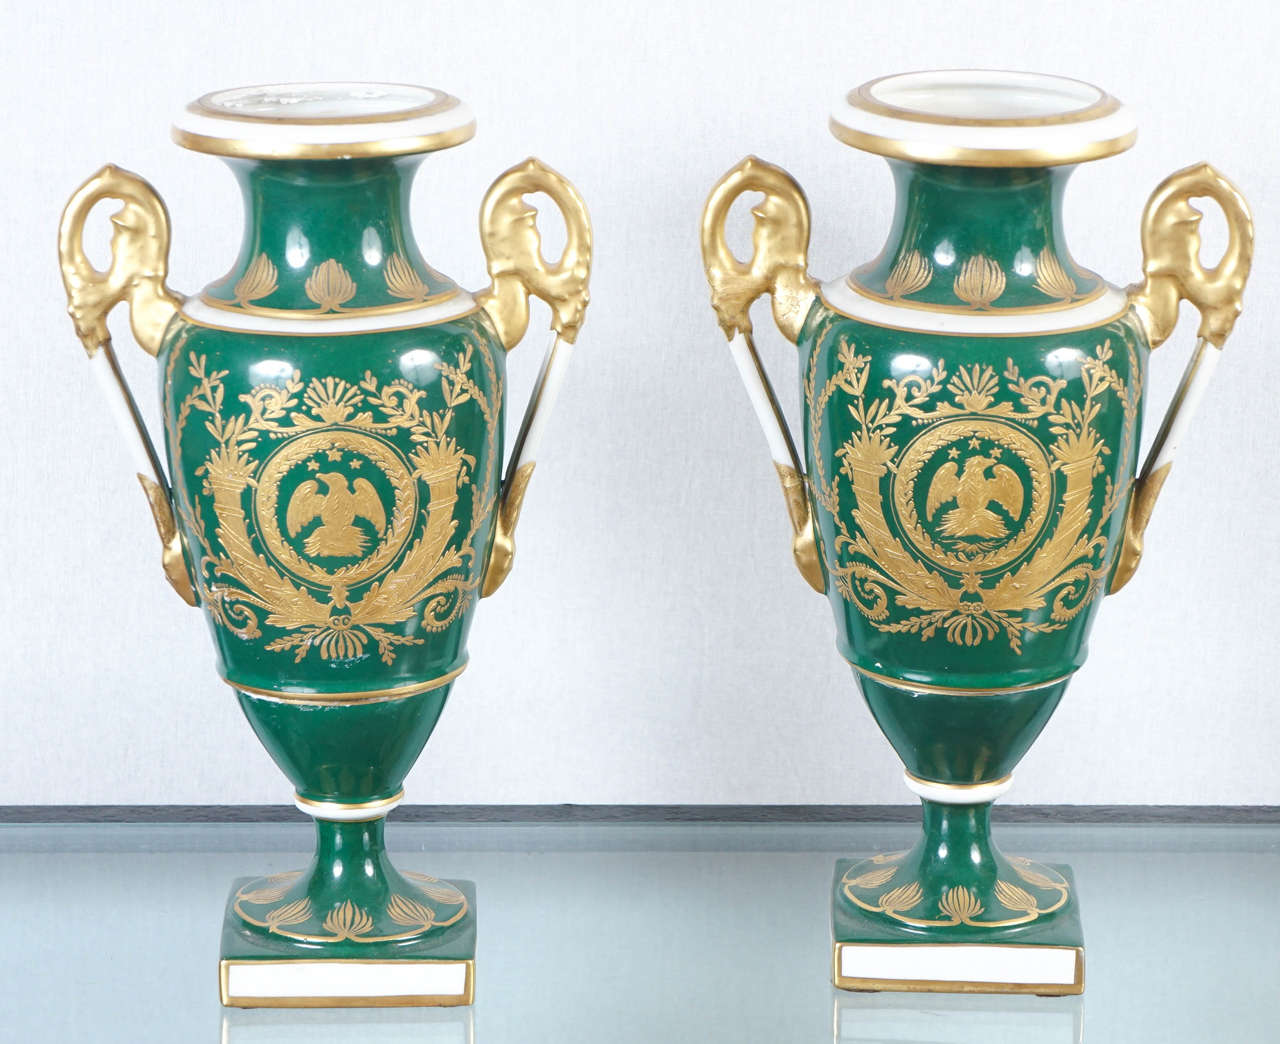 A pair of Porcelain hand-painted Lamp bases in the style of Empire Period in France.